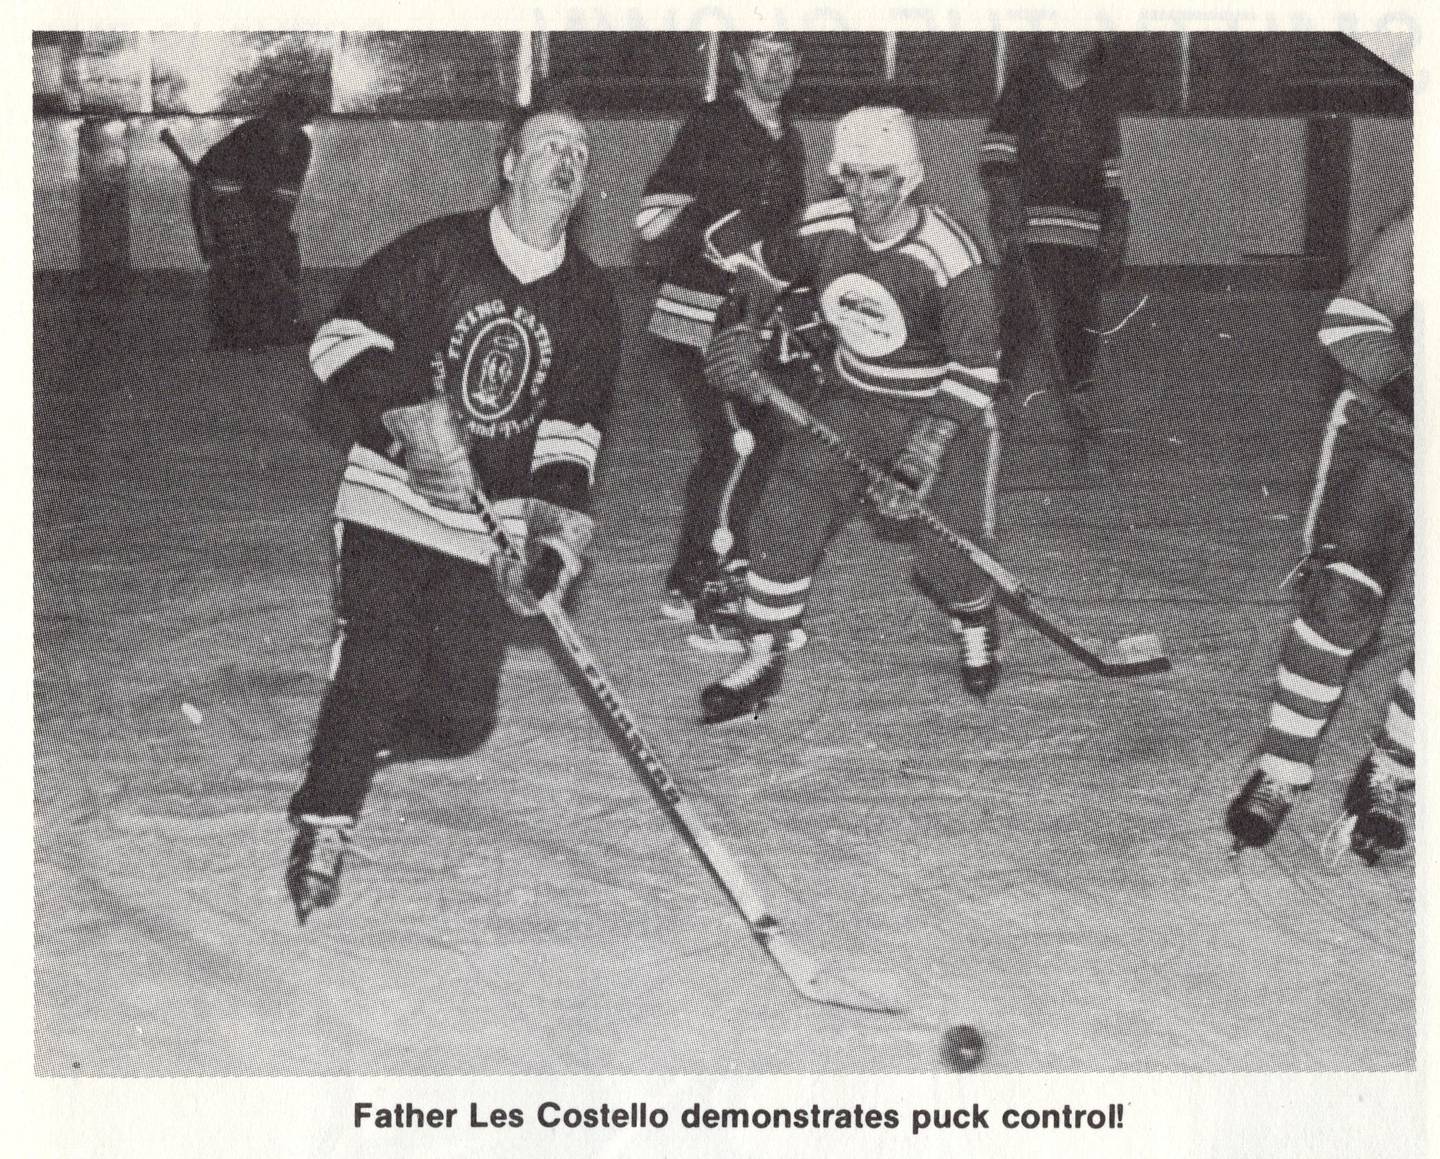 Father Les Costello handles the puck